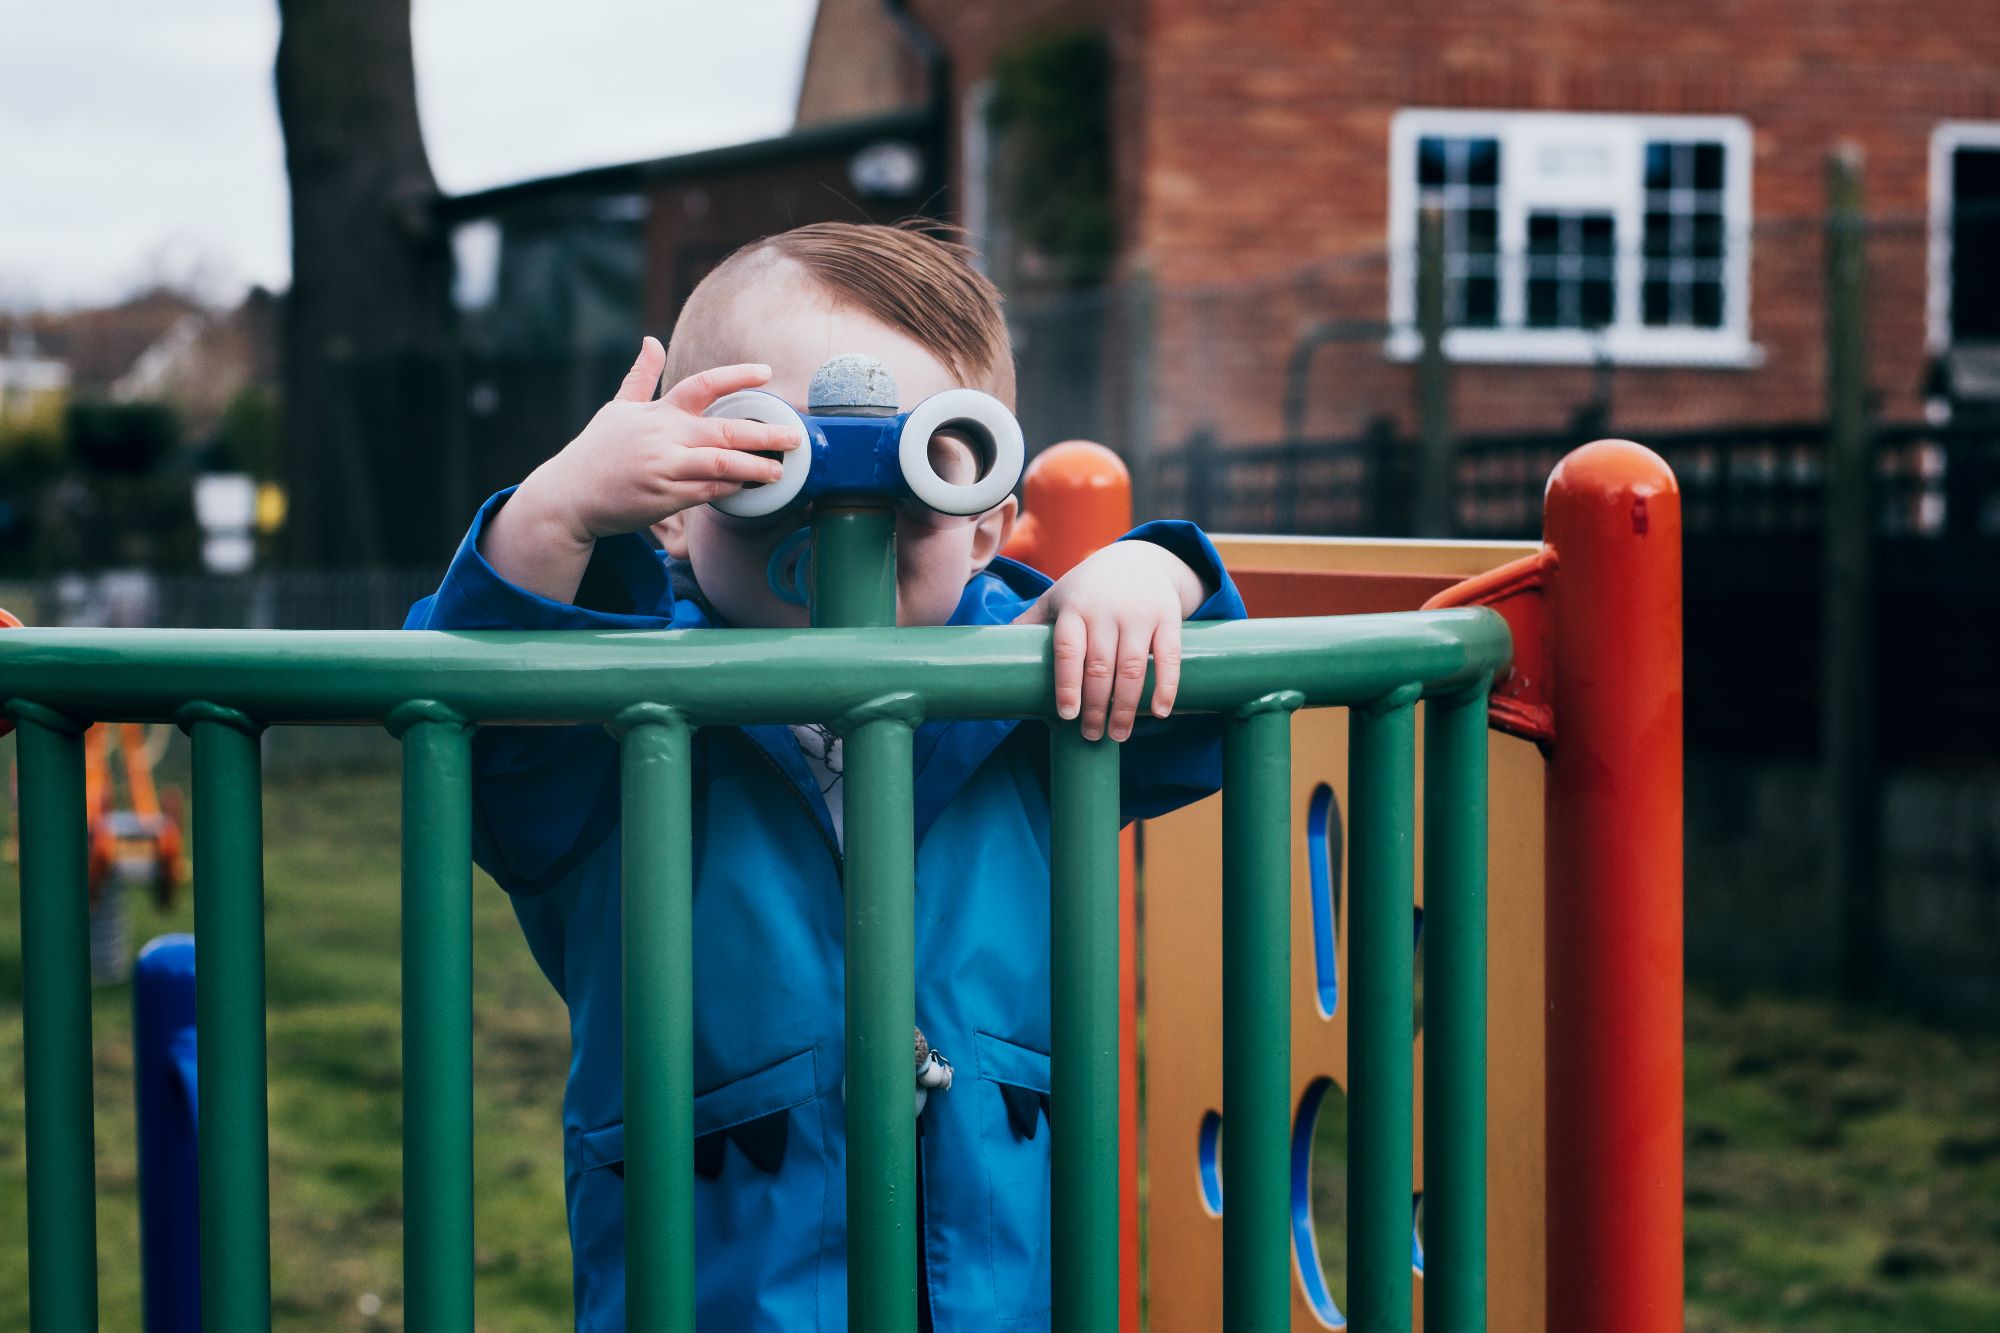 A little boy looks through some binoculars at the park,